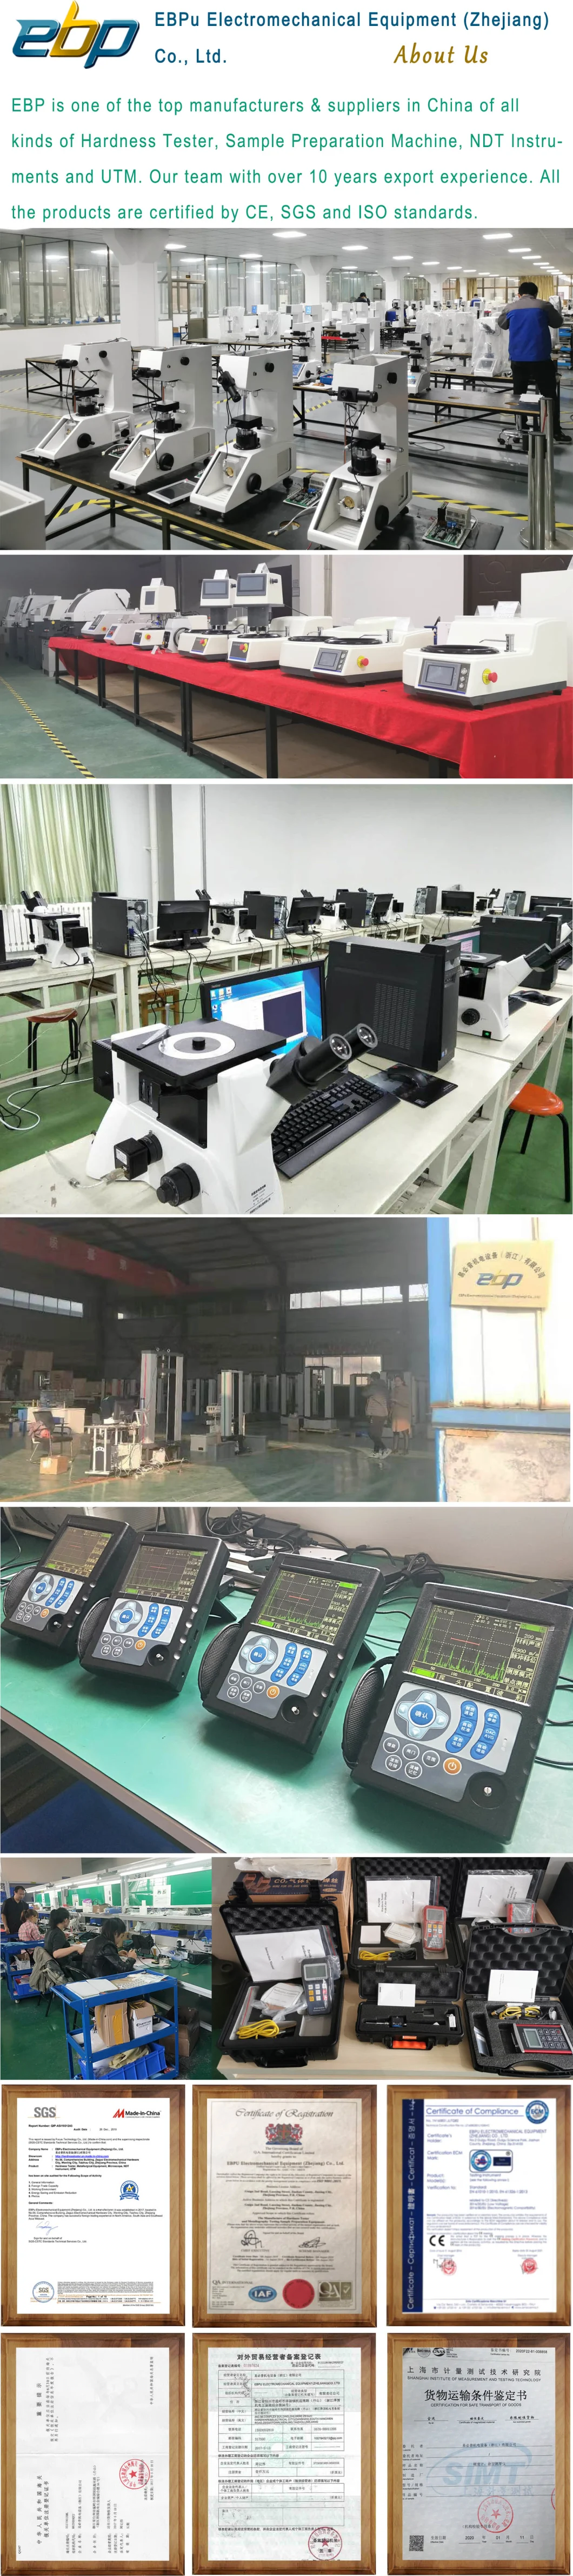 Automatic Loading Dwell Unloading Digital Micro Vickers Hardness Tester